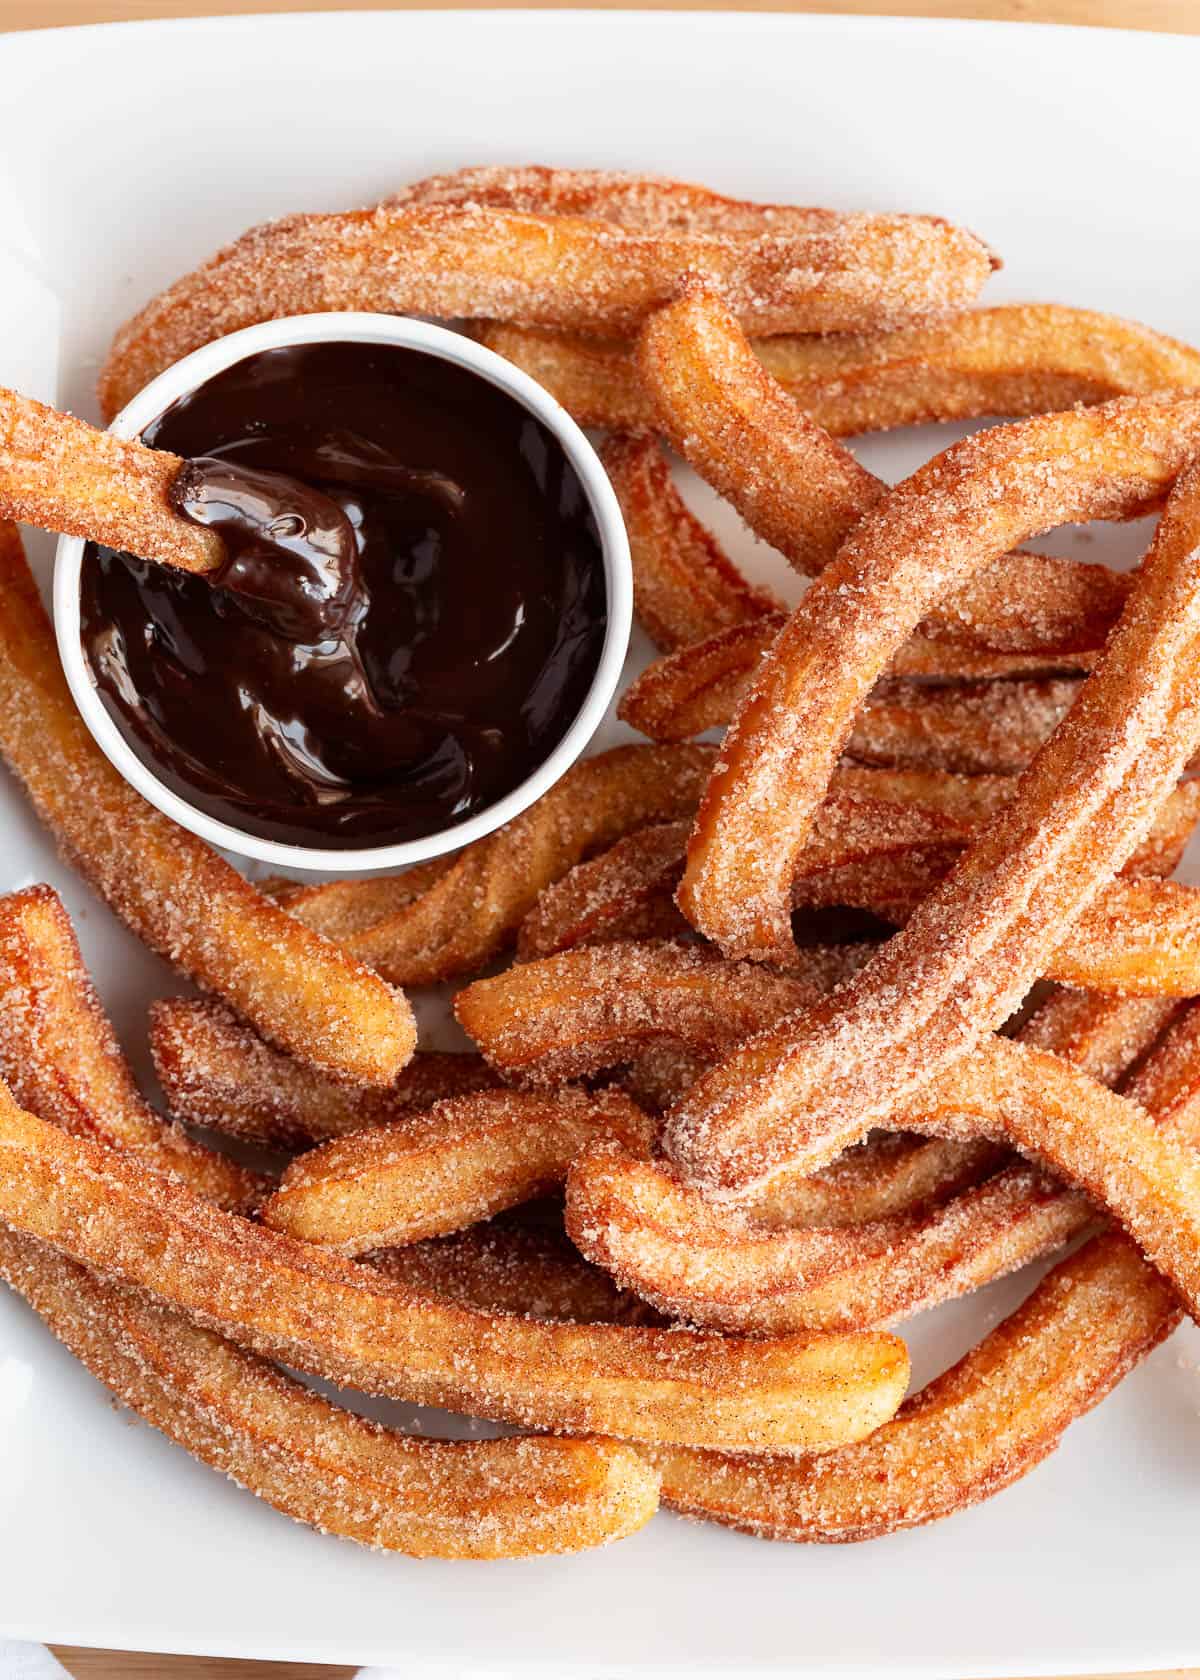 Churros on a plate being dipped in chocolate.